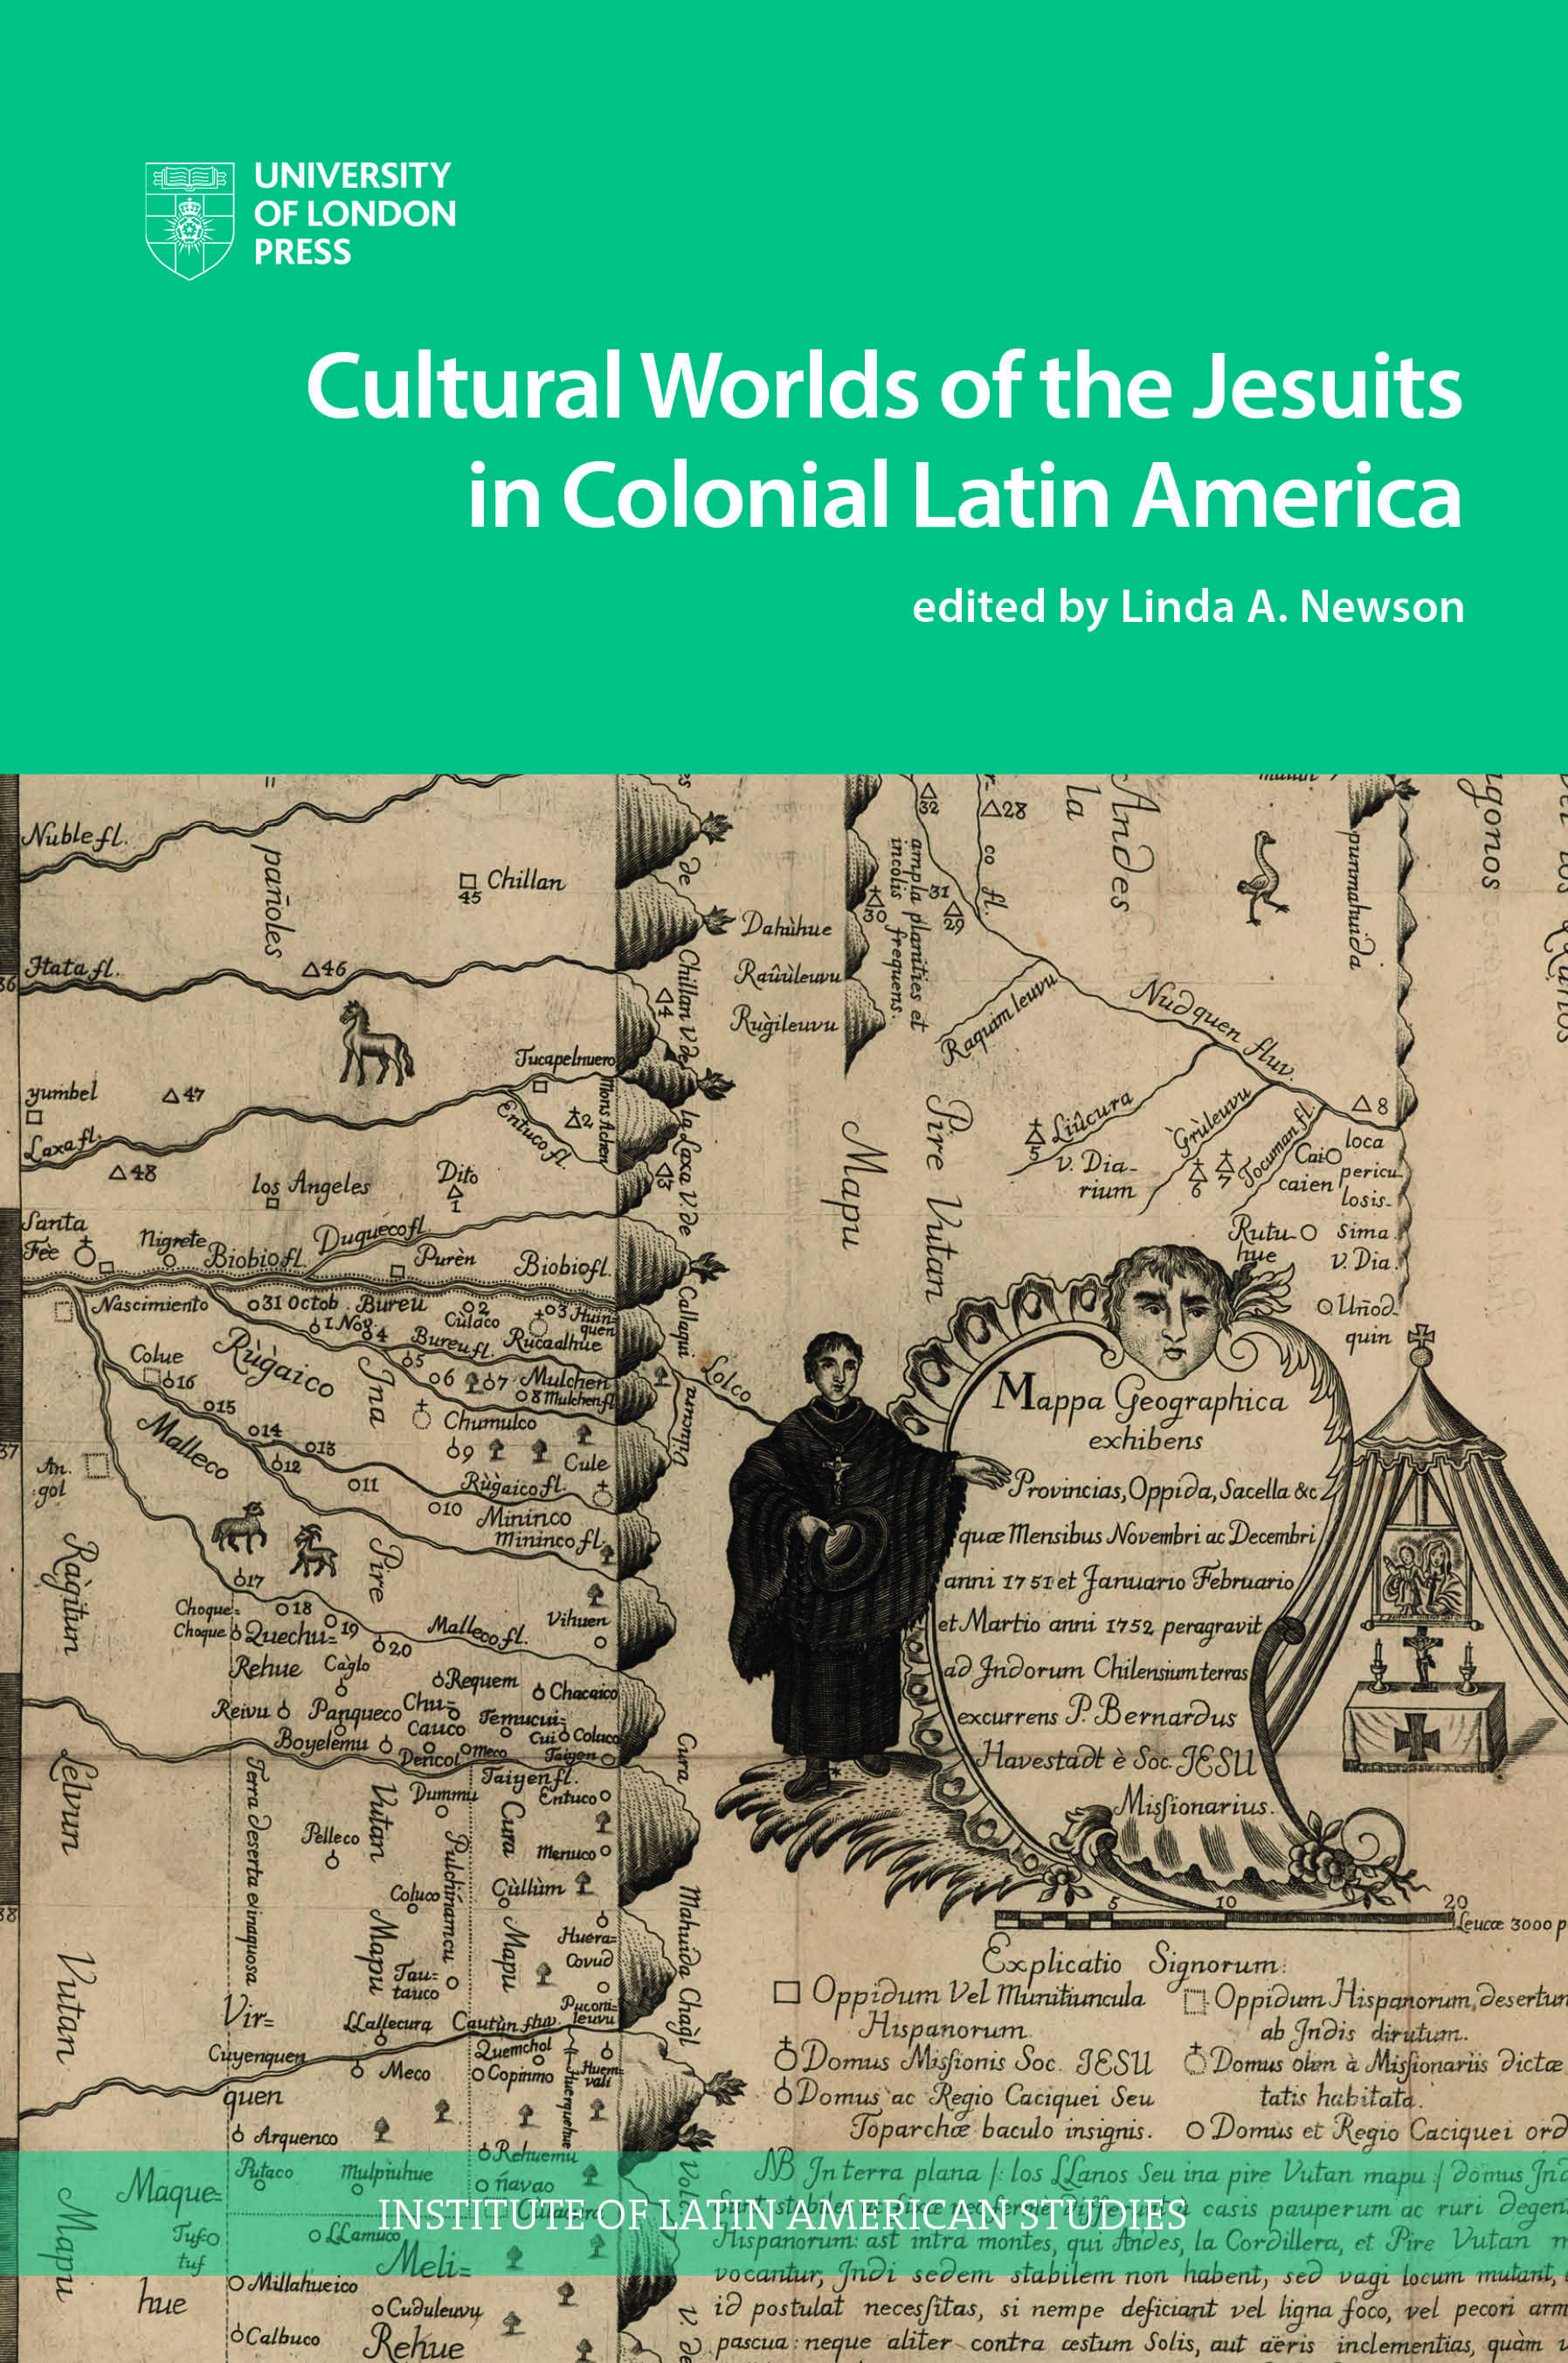 The Cultural World of the Jesuits in Colonial Latin America